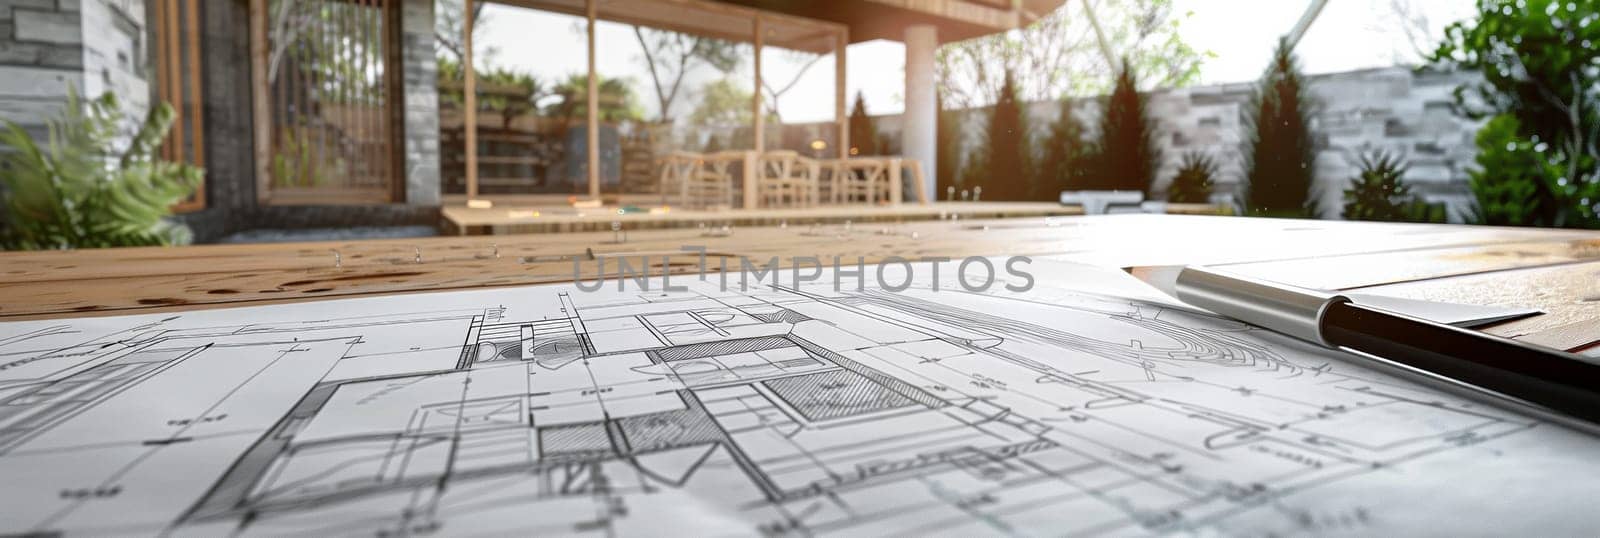 A detailed drawing of a charming house placed on a table, showcasing architectural plans and design ideas for a renovation project.